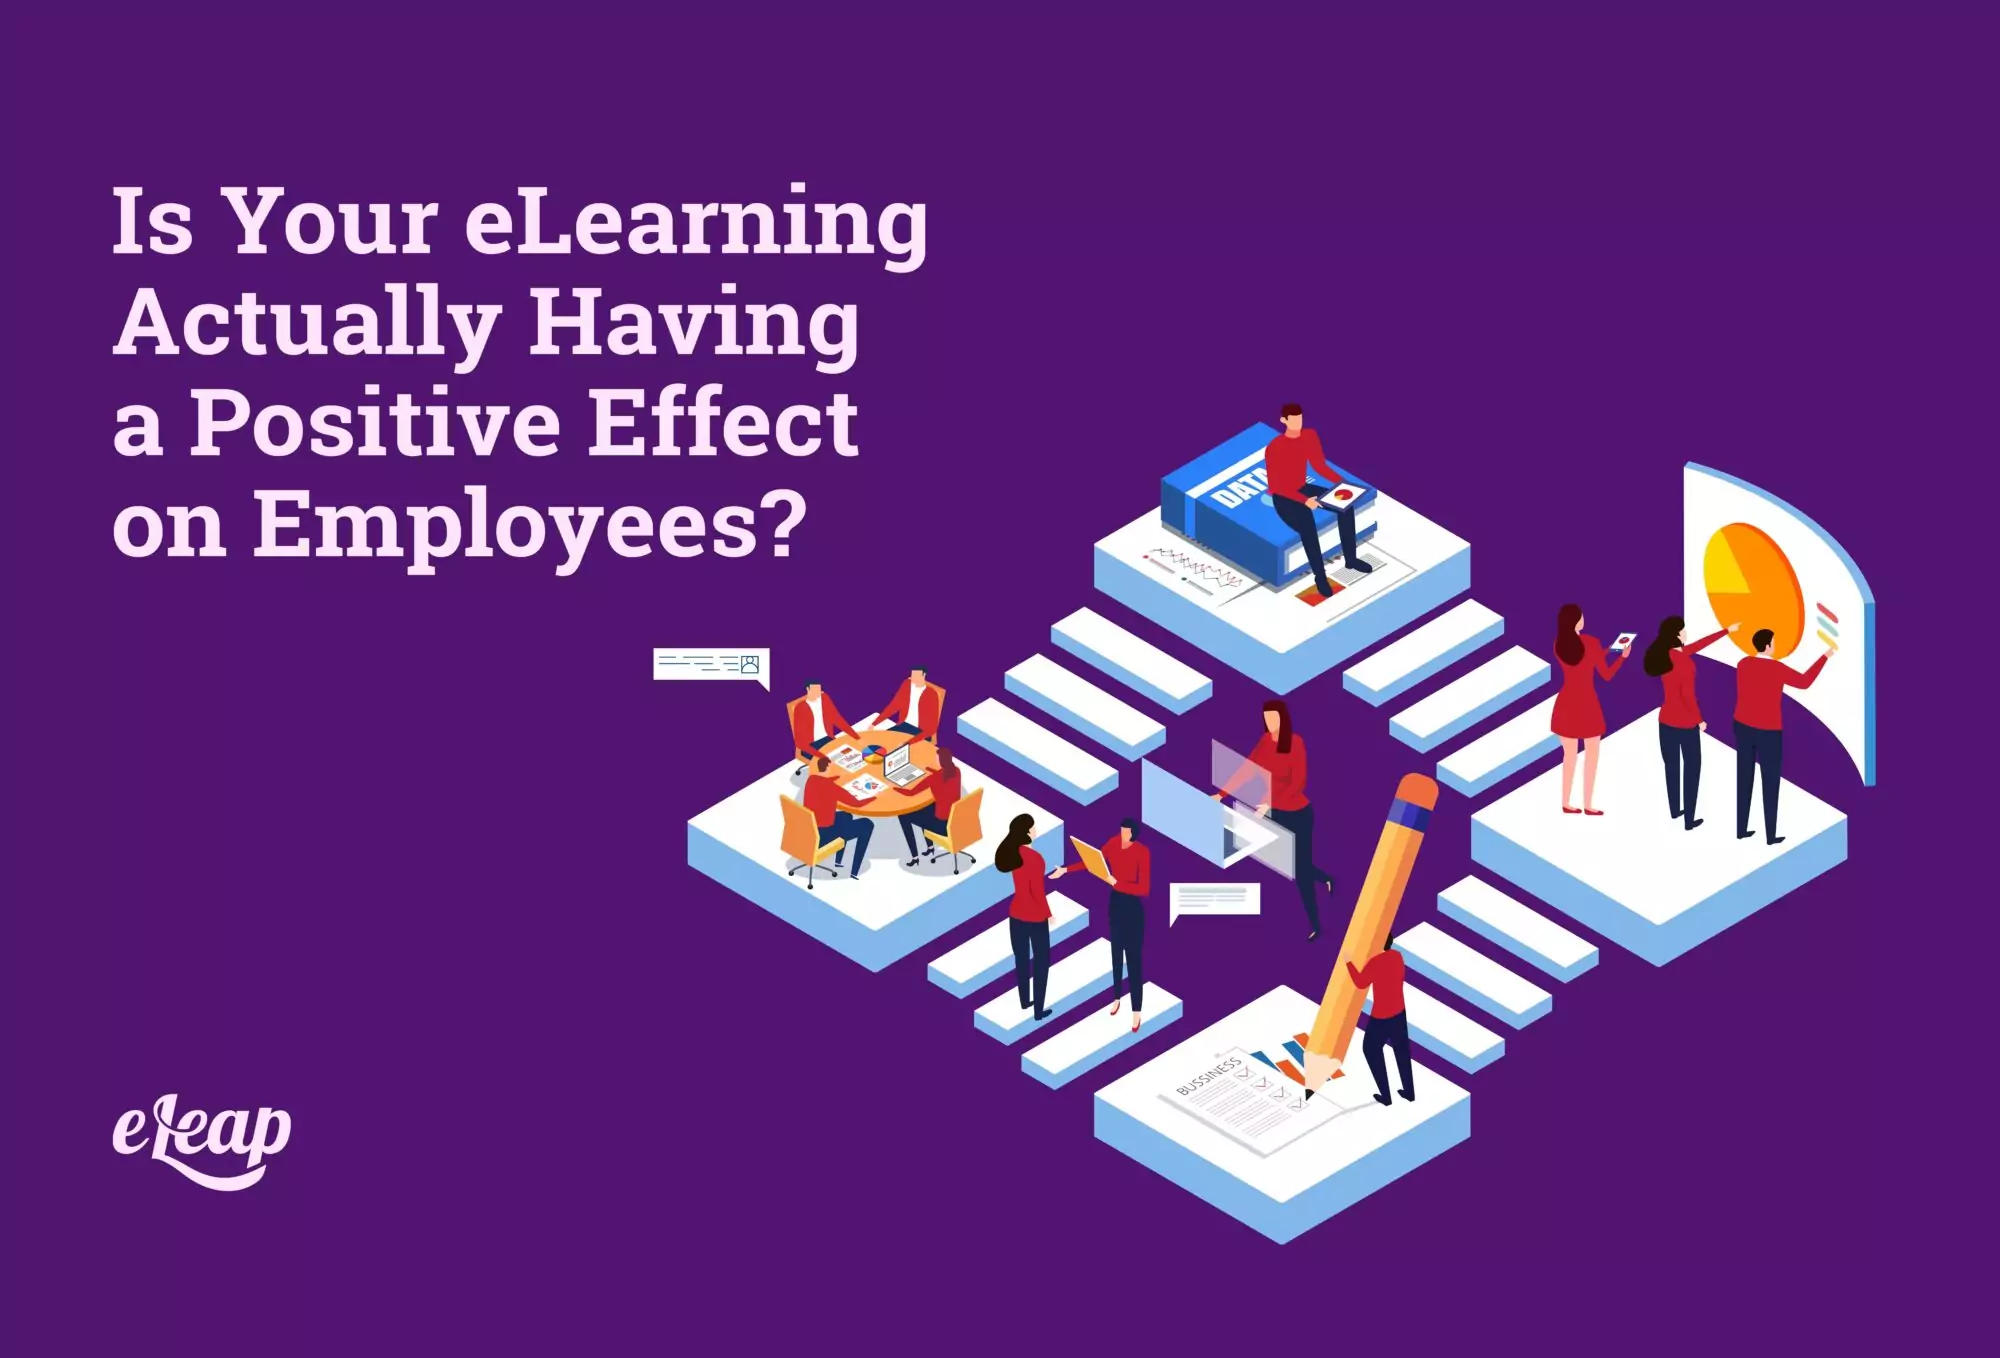 Is Your eLearning Actually Having a Positive Effect on Employees?